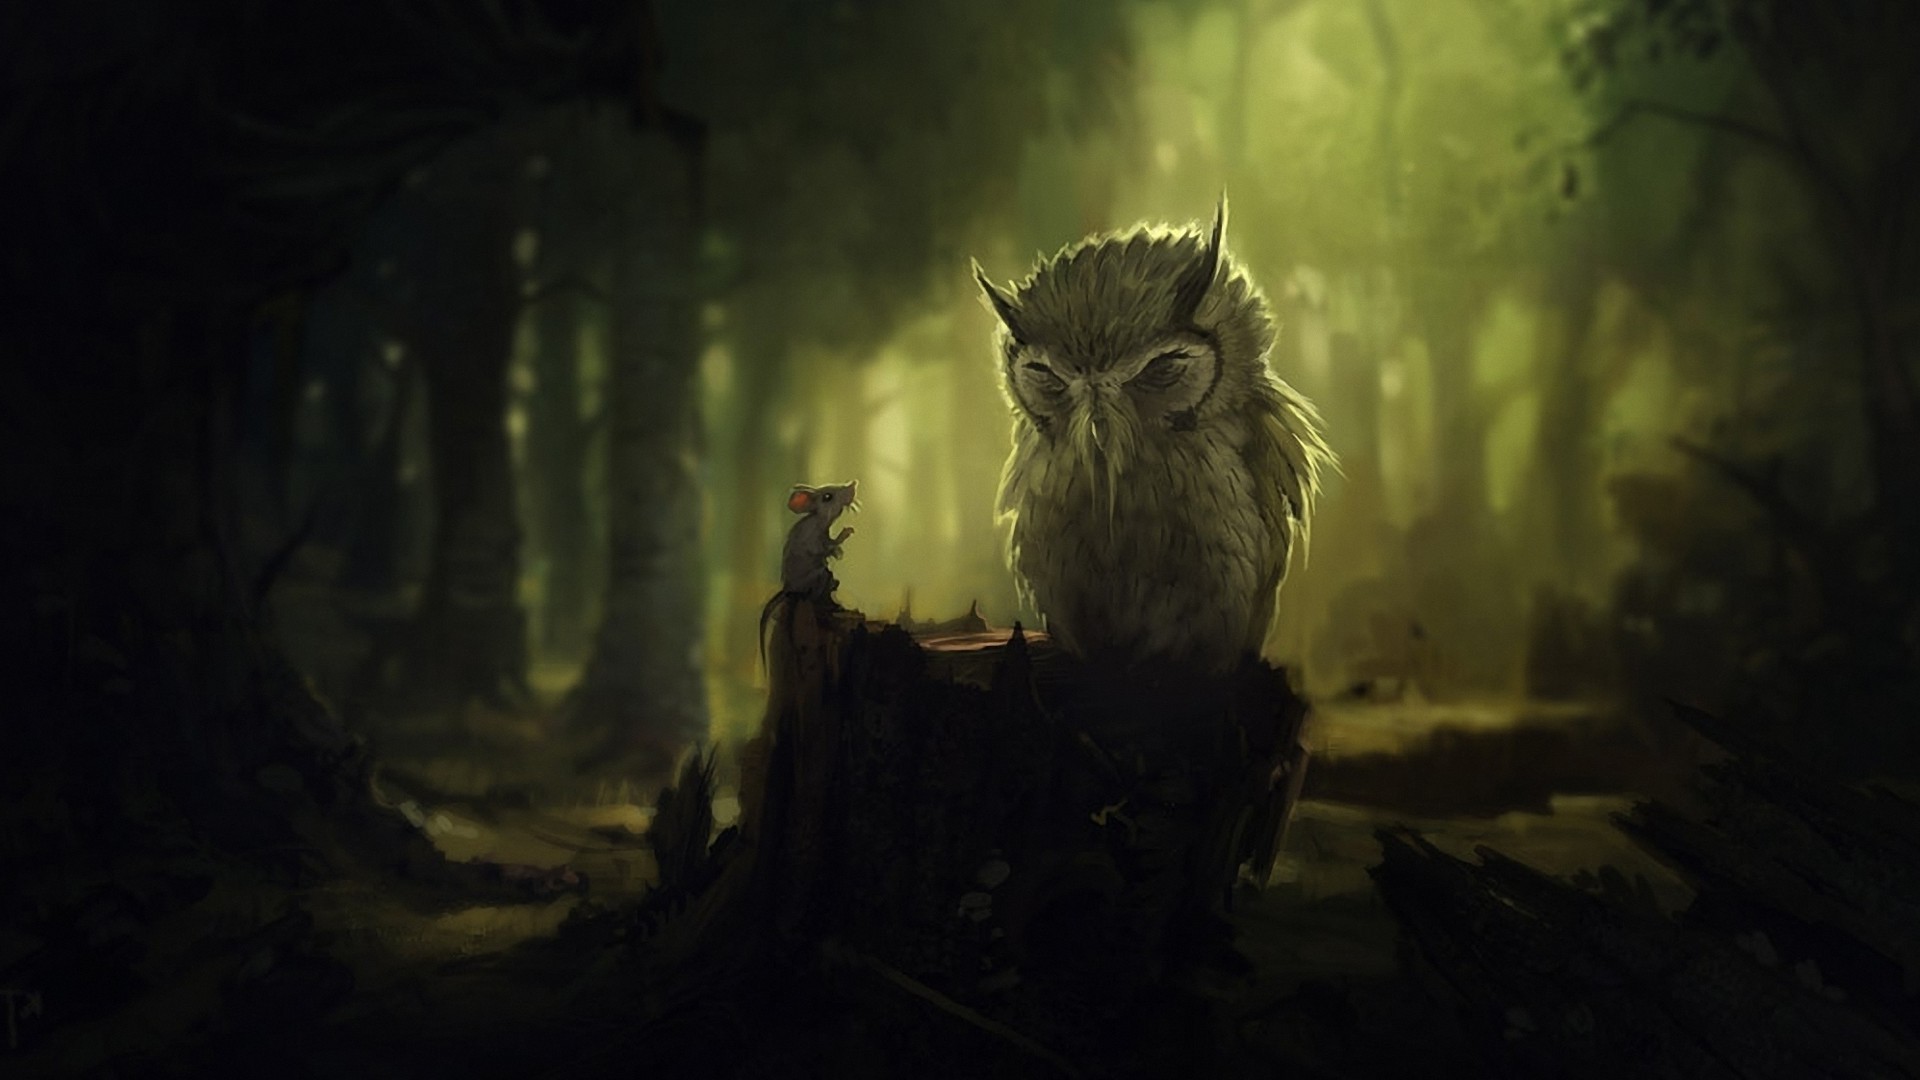 1920x1080 Mouse and owl in the dark forest HD Wallpaper 